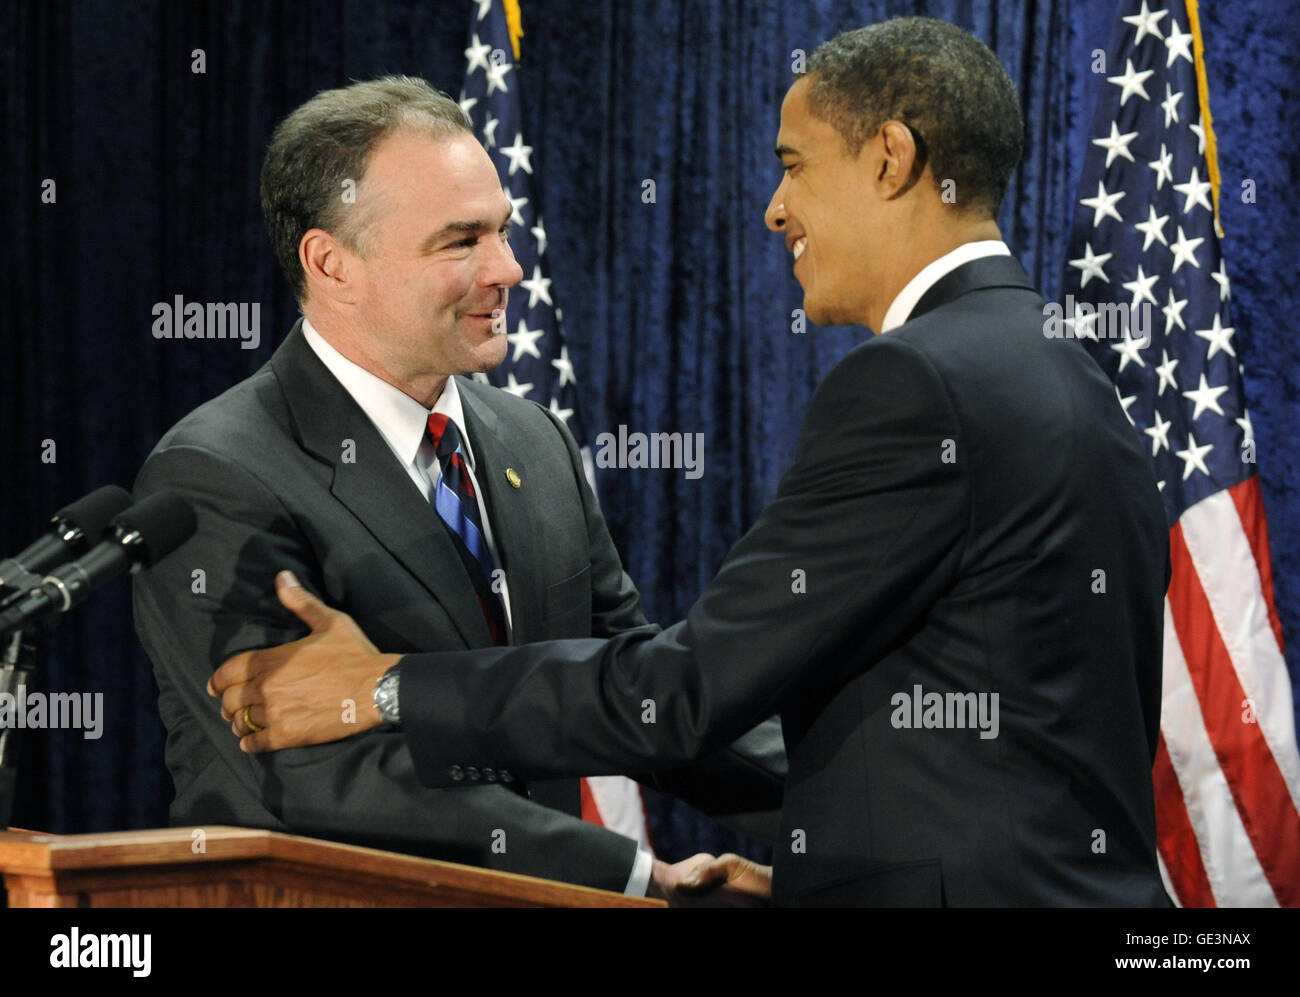 Washington, District of Columbia, USA. 8th Jan, 2009. Washington, DC - January 8, 2009 -- Virginia Governor Tim Kaine (L) shakes hands with United States President-elect Barack Obama after Kaine was introduced as the new Chairman of the Democratic National Committee in Washington on Thursday, January 8, 2009. Credit: Kevin Dietsch - Pool via CNP © Kevin Dietsch/CNP/ZUMA Wire/Alamy Live News Stock Photo